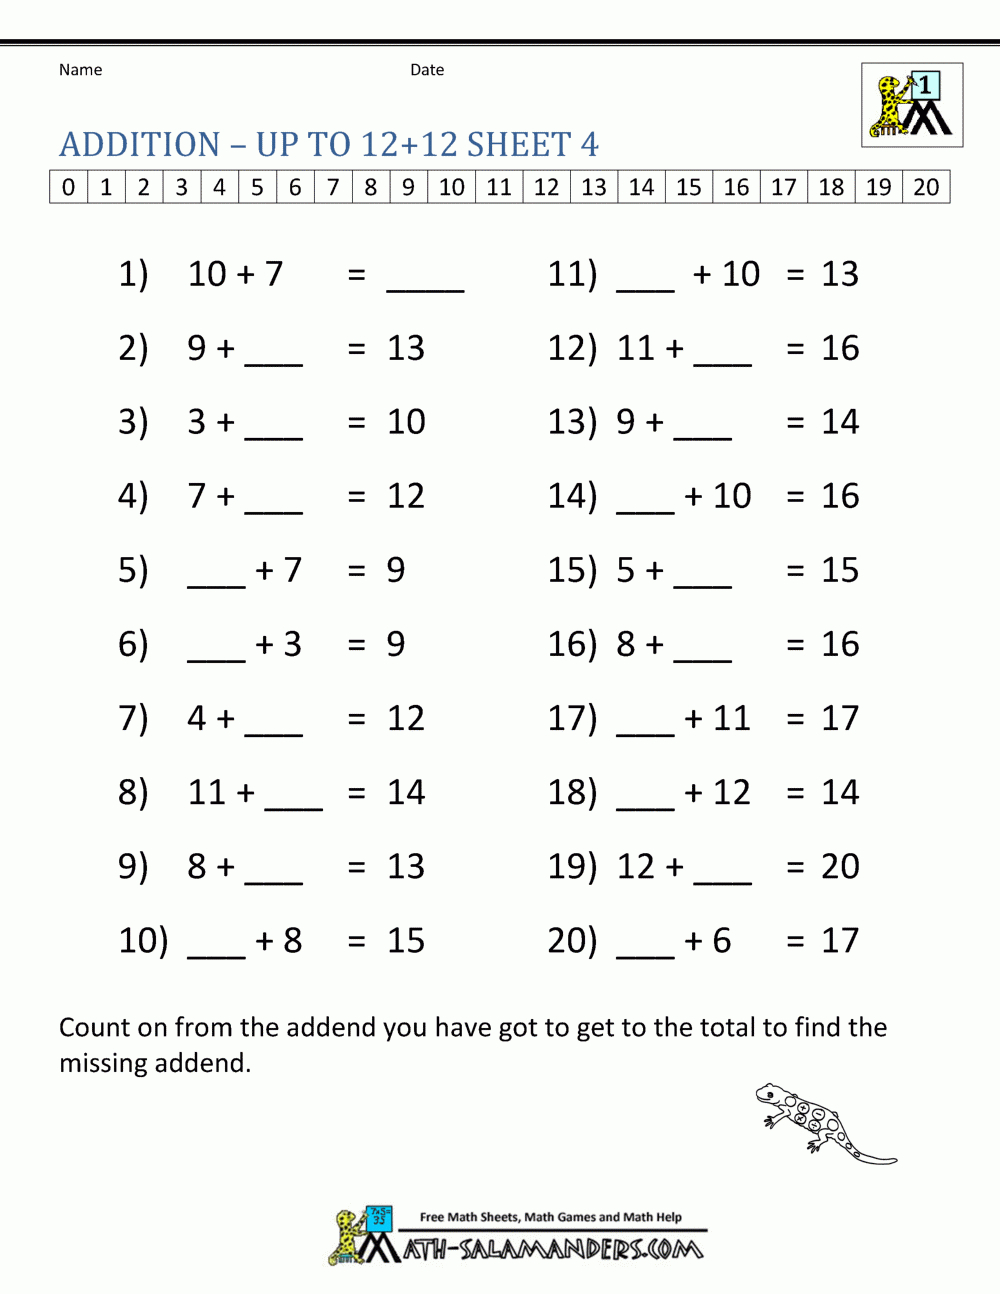 Learning Addition Facts Worksheets 1St Grade | Addition Facts To 20 Printable Worksheets